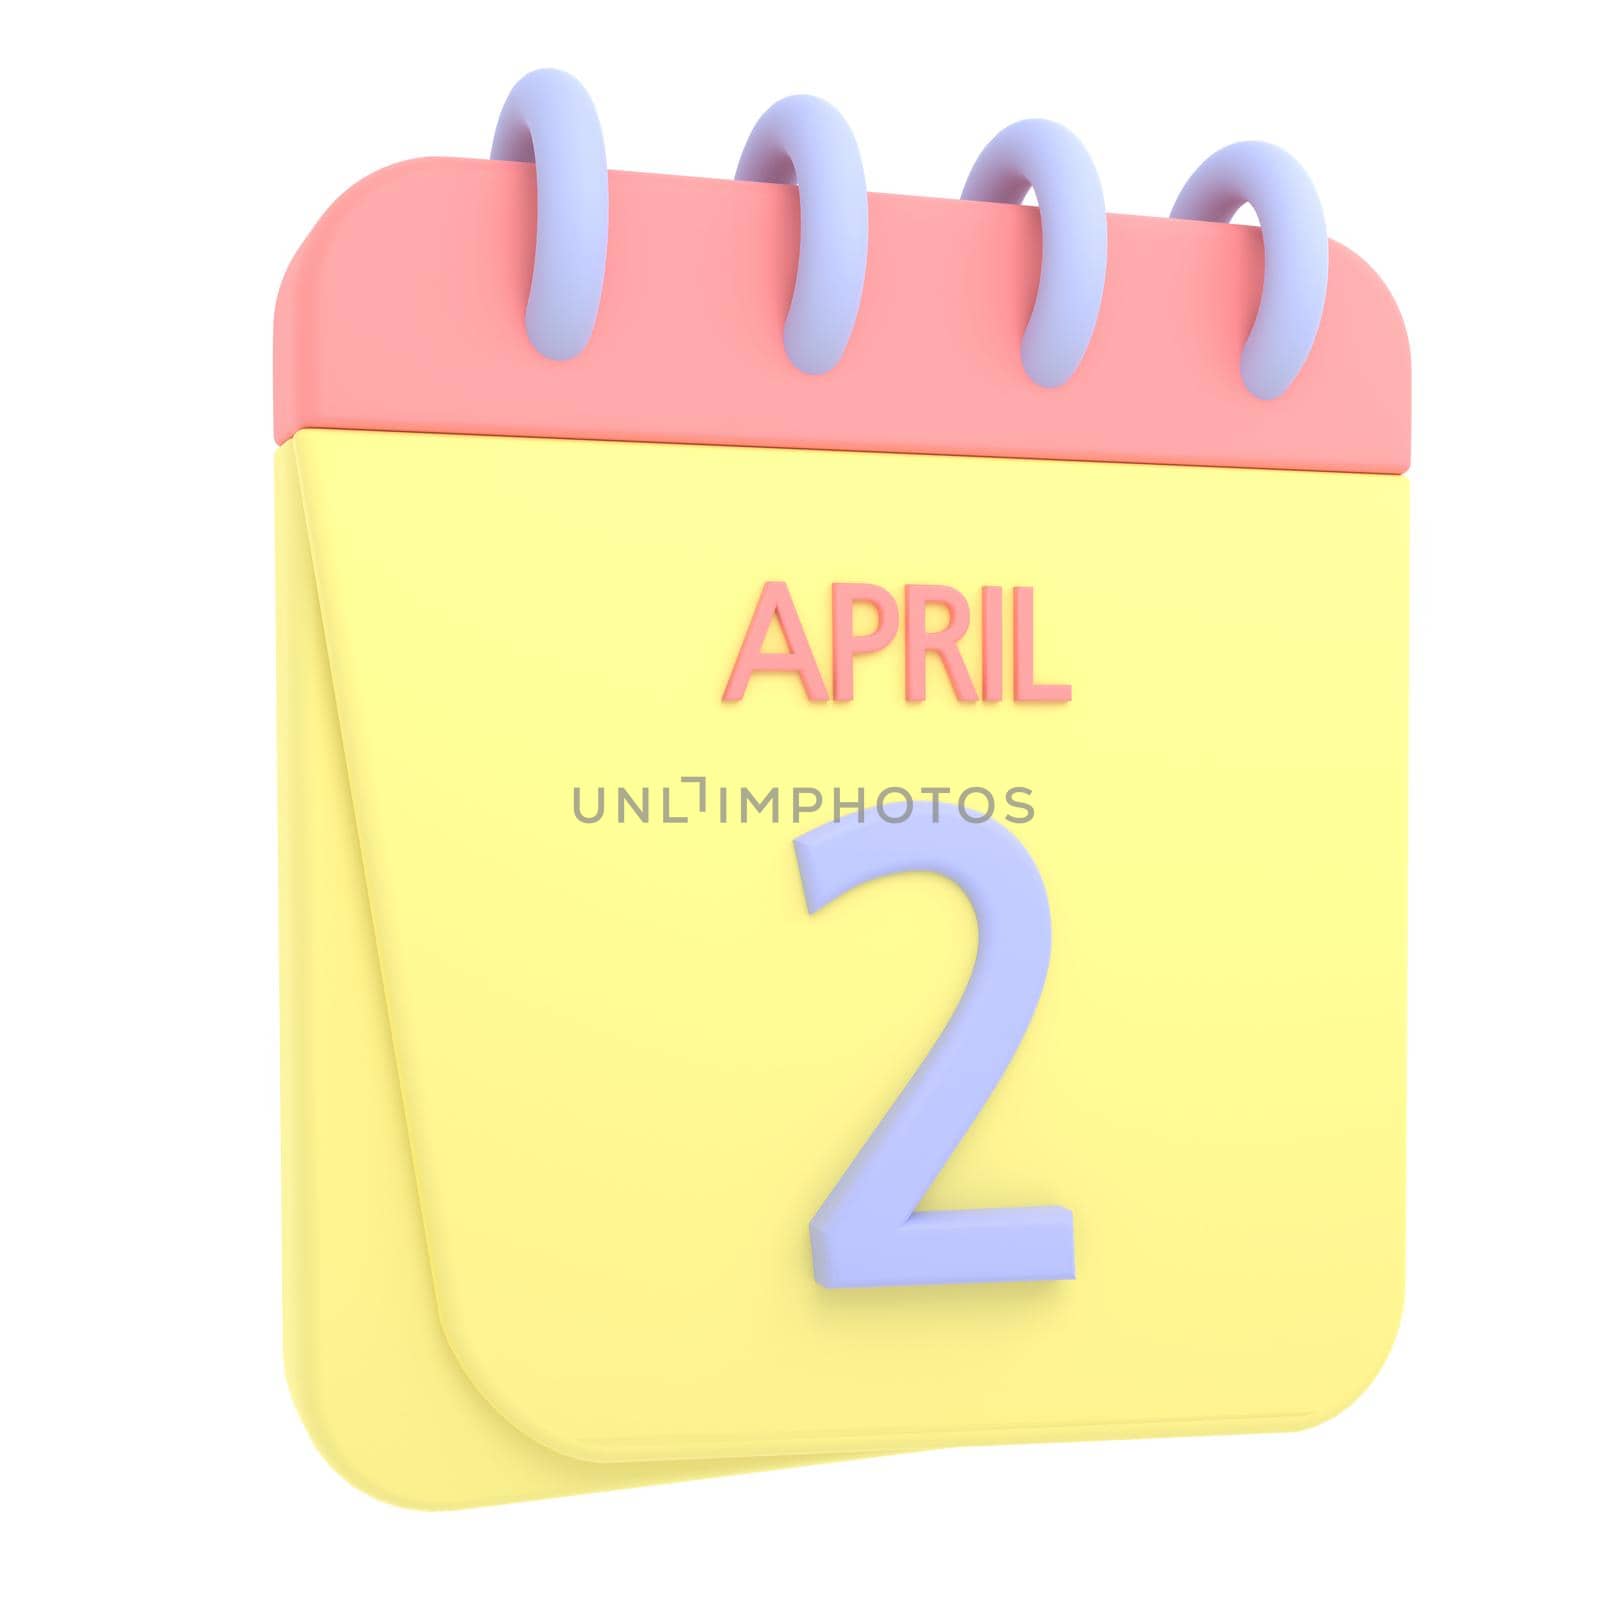 2nd April 3D calendar icon. Web style. High resolution image. White background